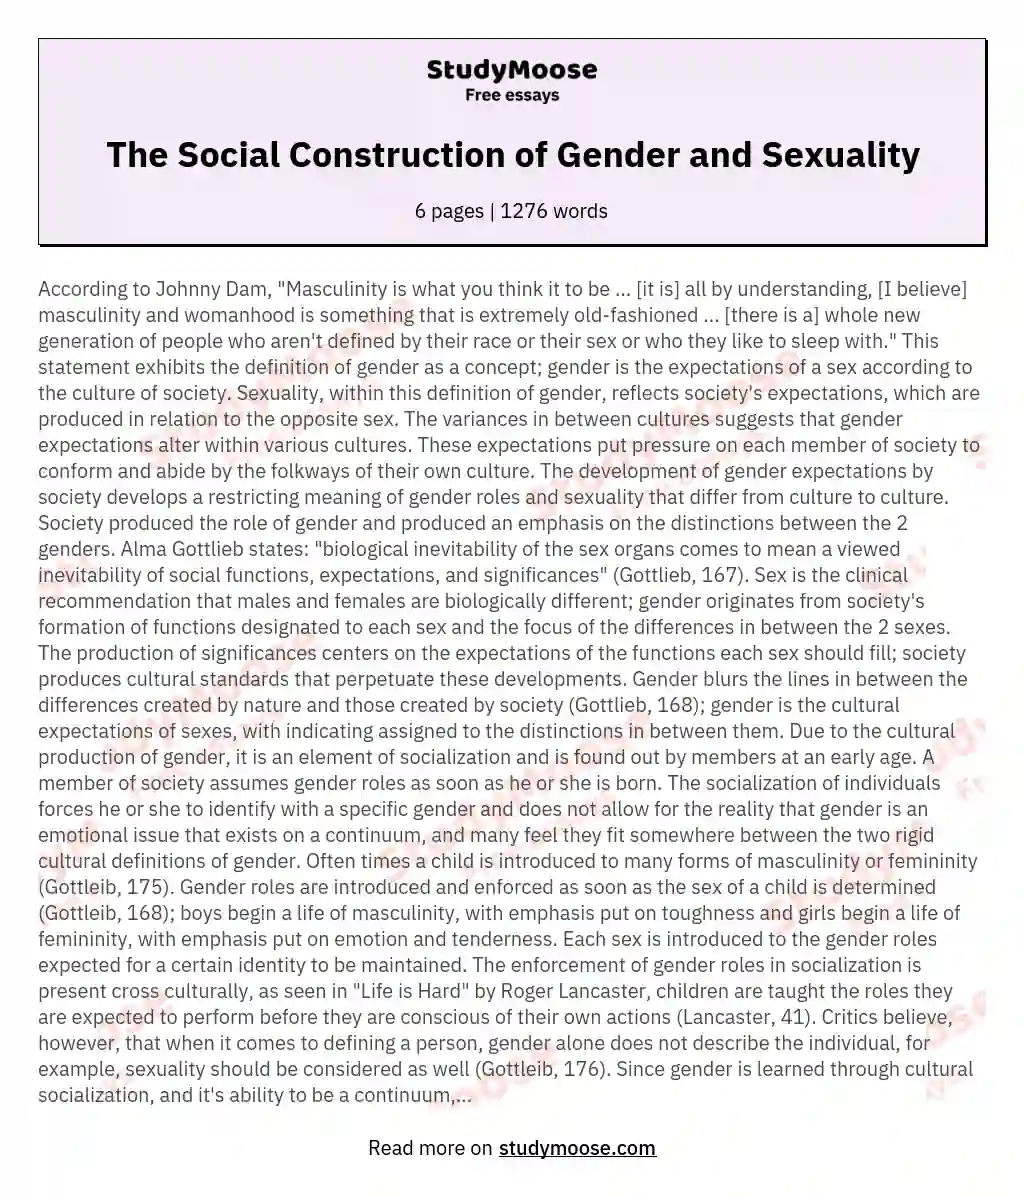 The Social Construction of Gender and Sexuality